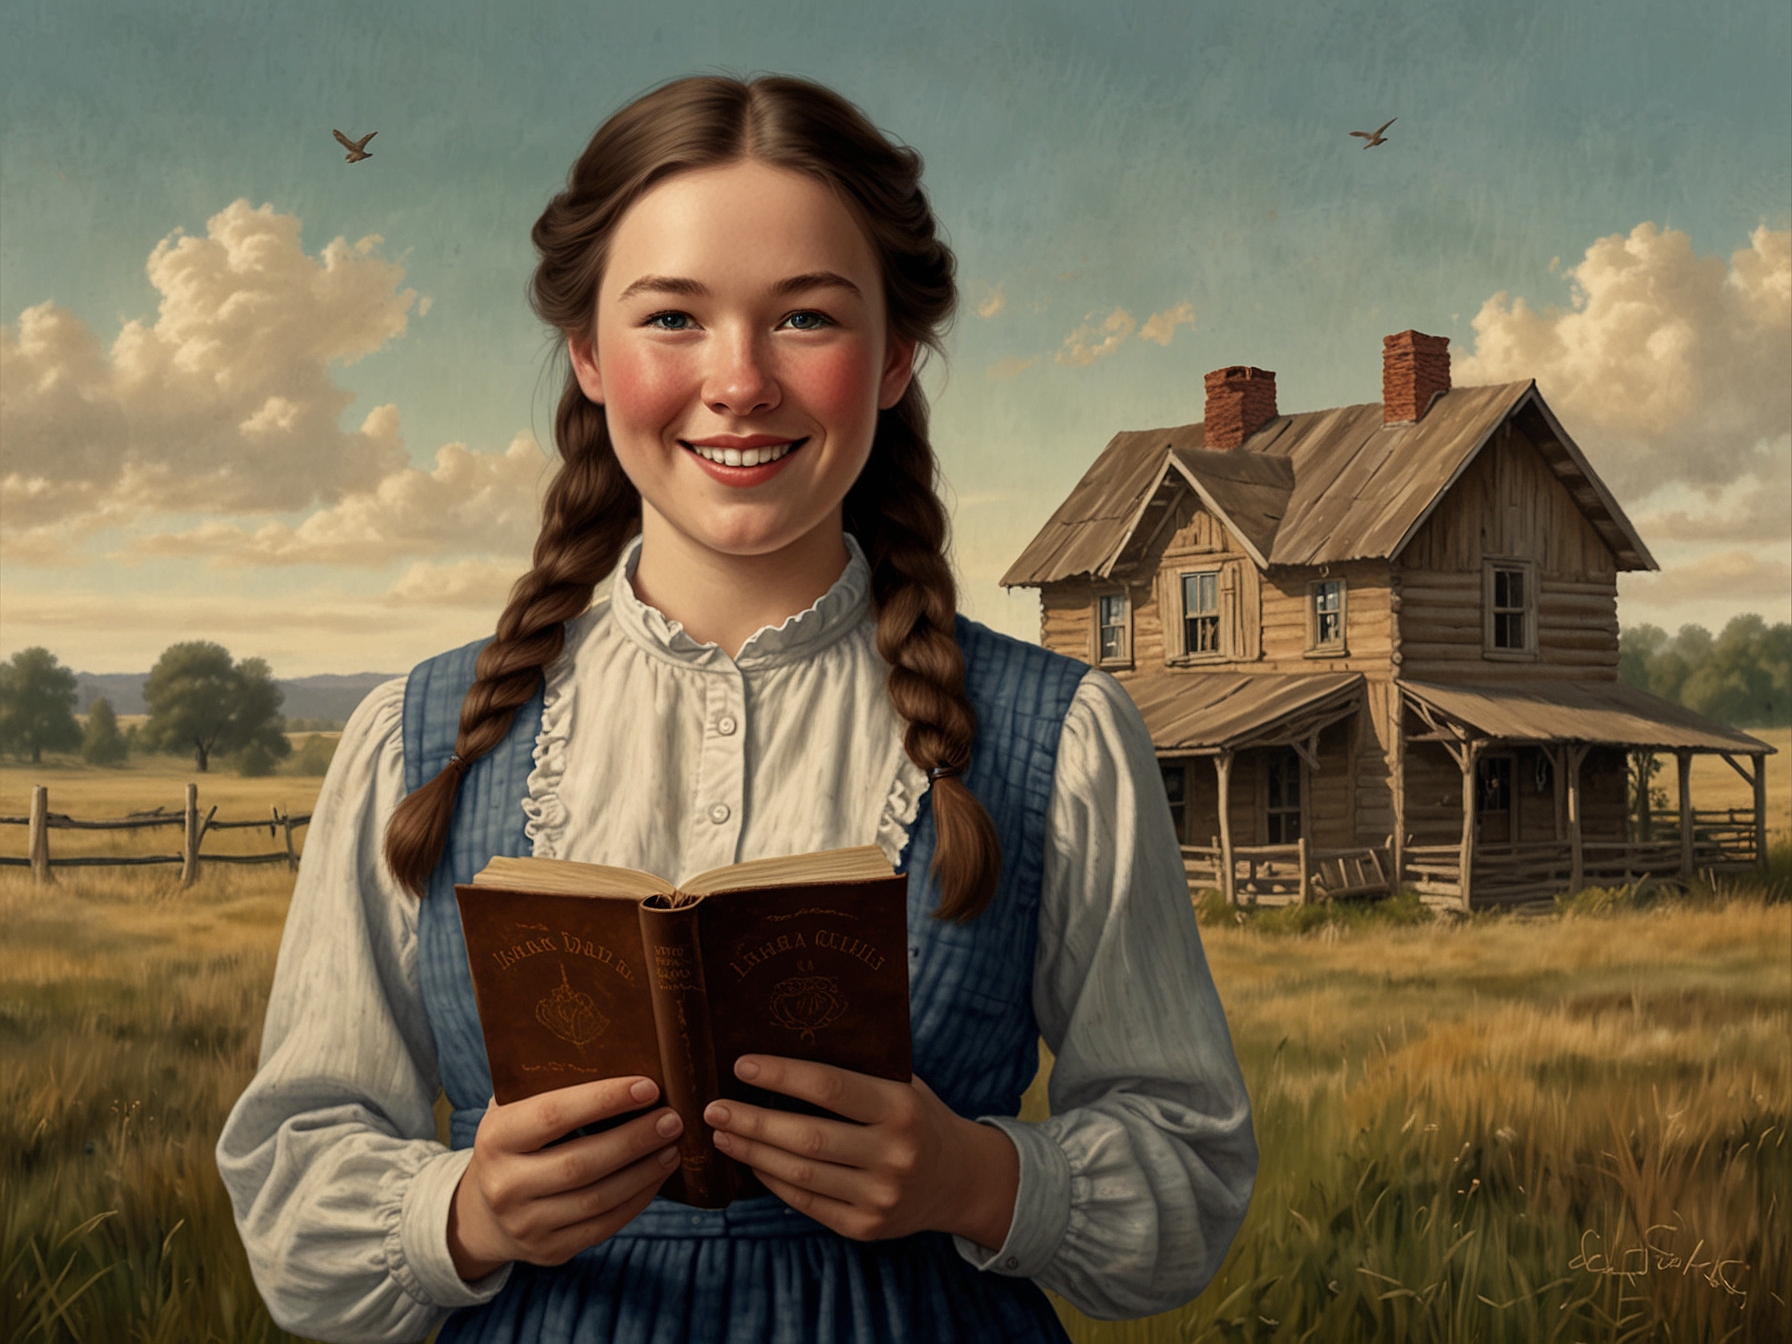 A depiction of a smiling Laura Ingalls Wilder holding her 'Little House' book series, showcasing her late-blooming literary career that began in her 60s and captivated readers worldwide.